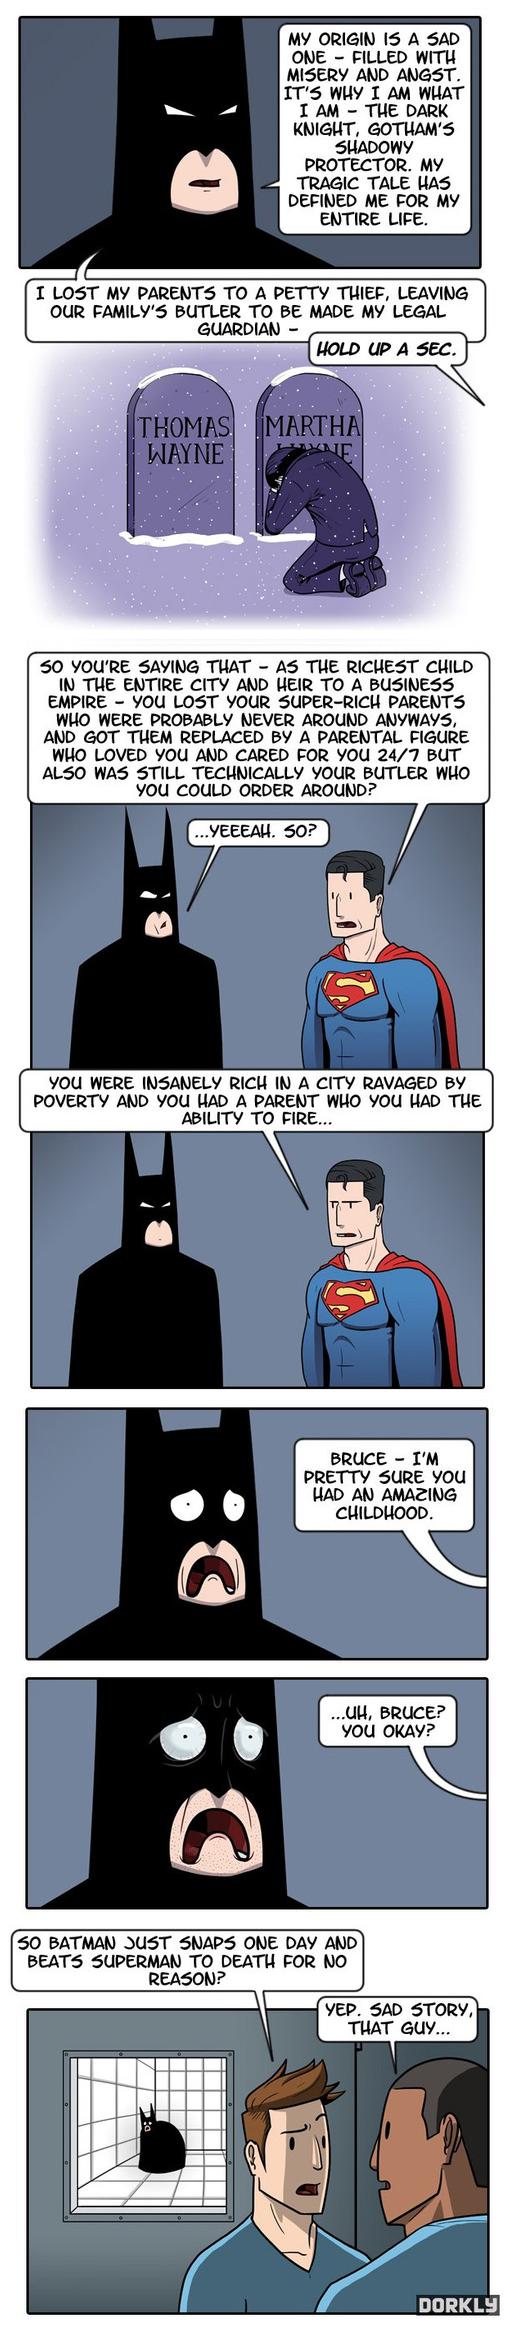 Batman finally lost it... Credits to the guys at Dorkly.